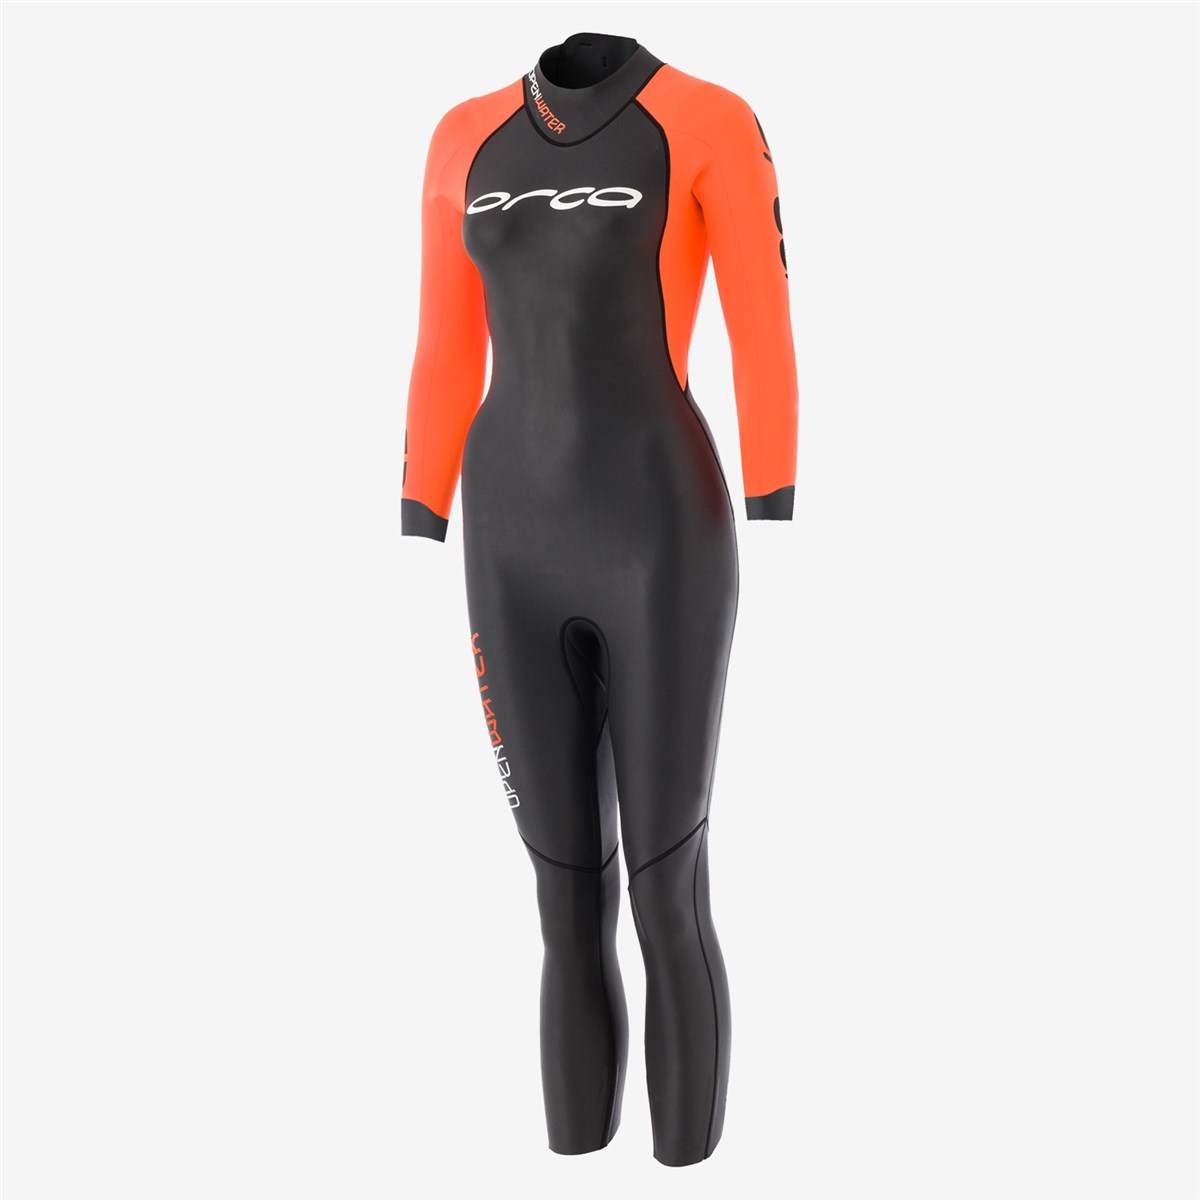 Orca Womens Openwater Full Sleeve Wetsuit product image